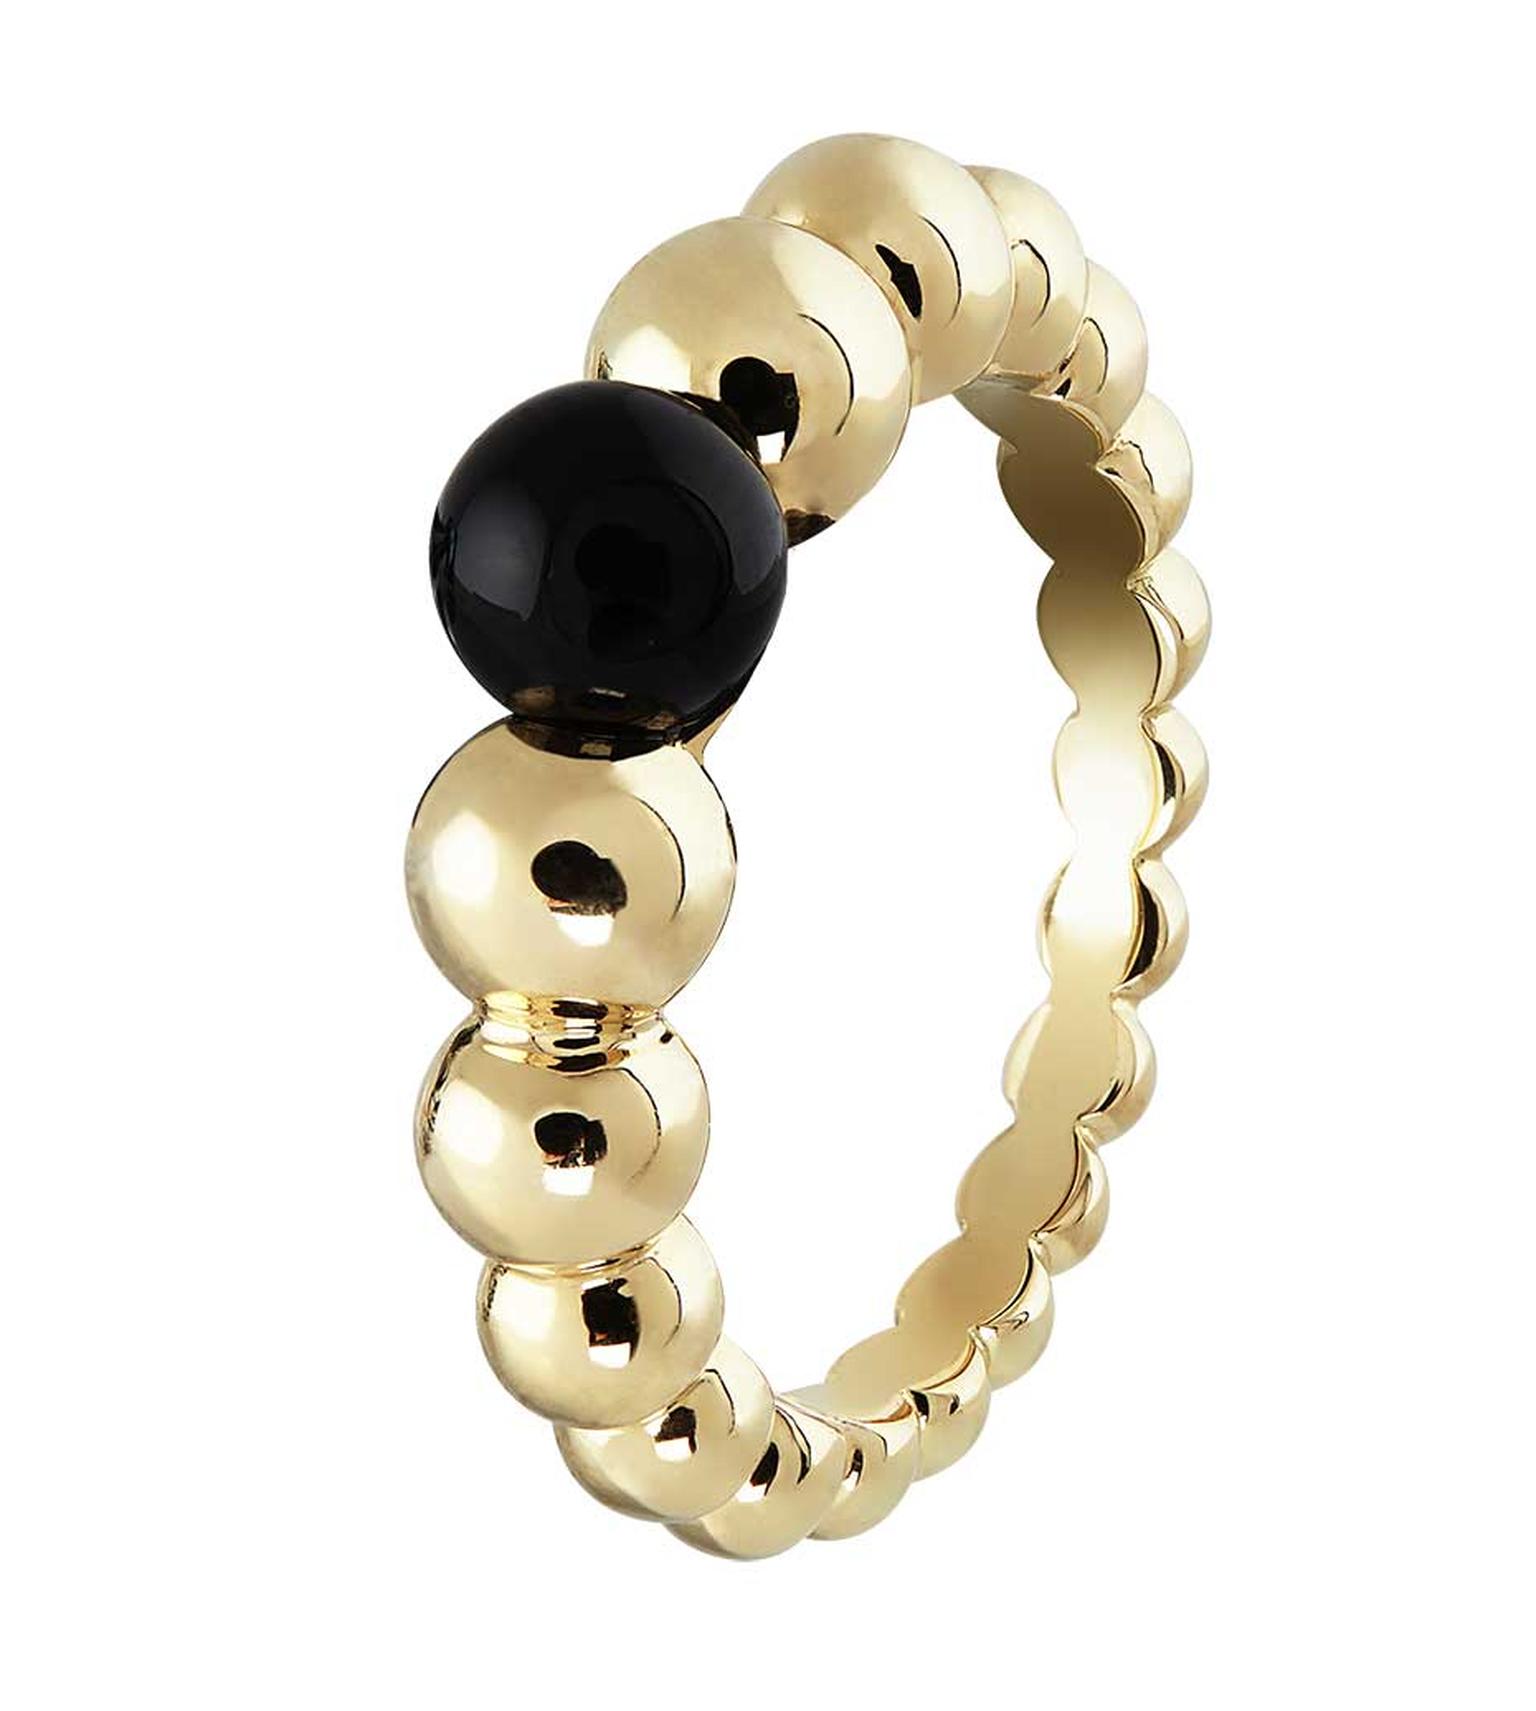 Van Cleef & Arpels Perlée Couleur ring in yellow gold with onyx.